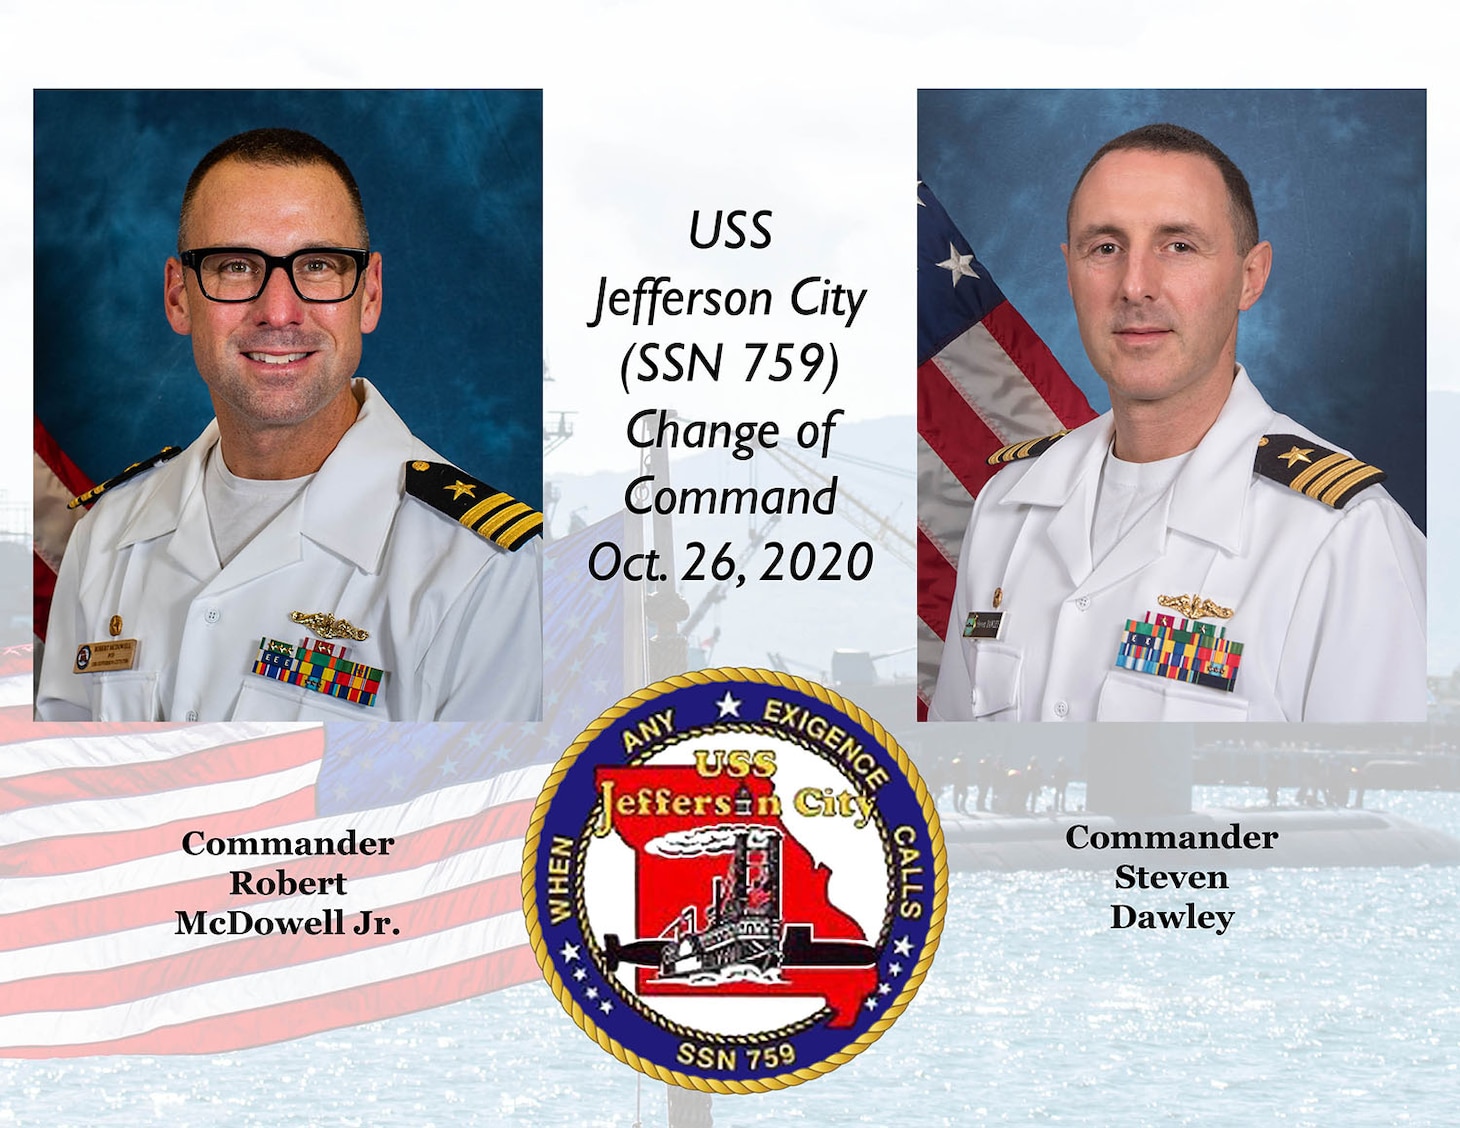 A graphic depicting the incoming and outgoing commanding officers for USS Jefferson City (SSN 759).